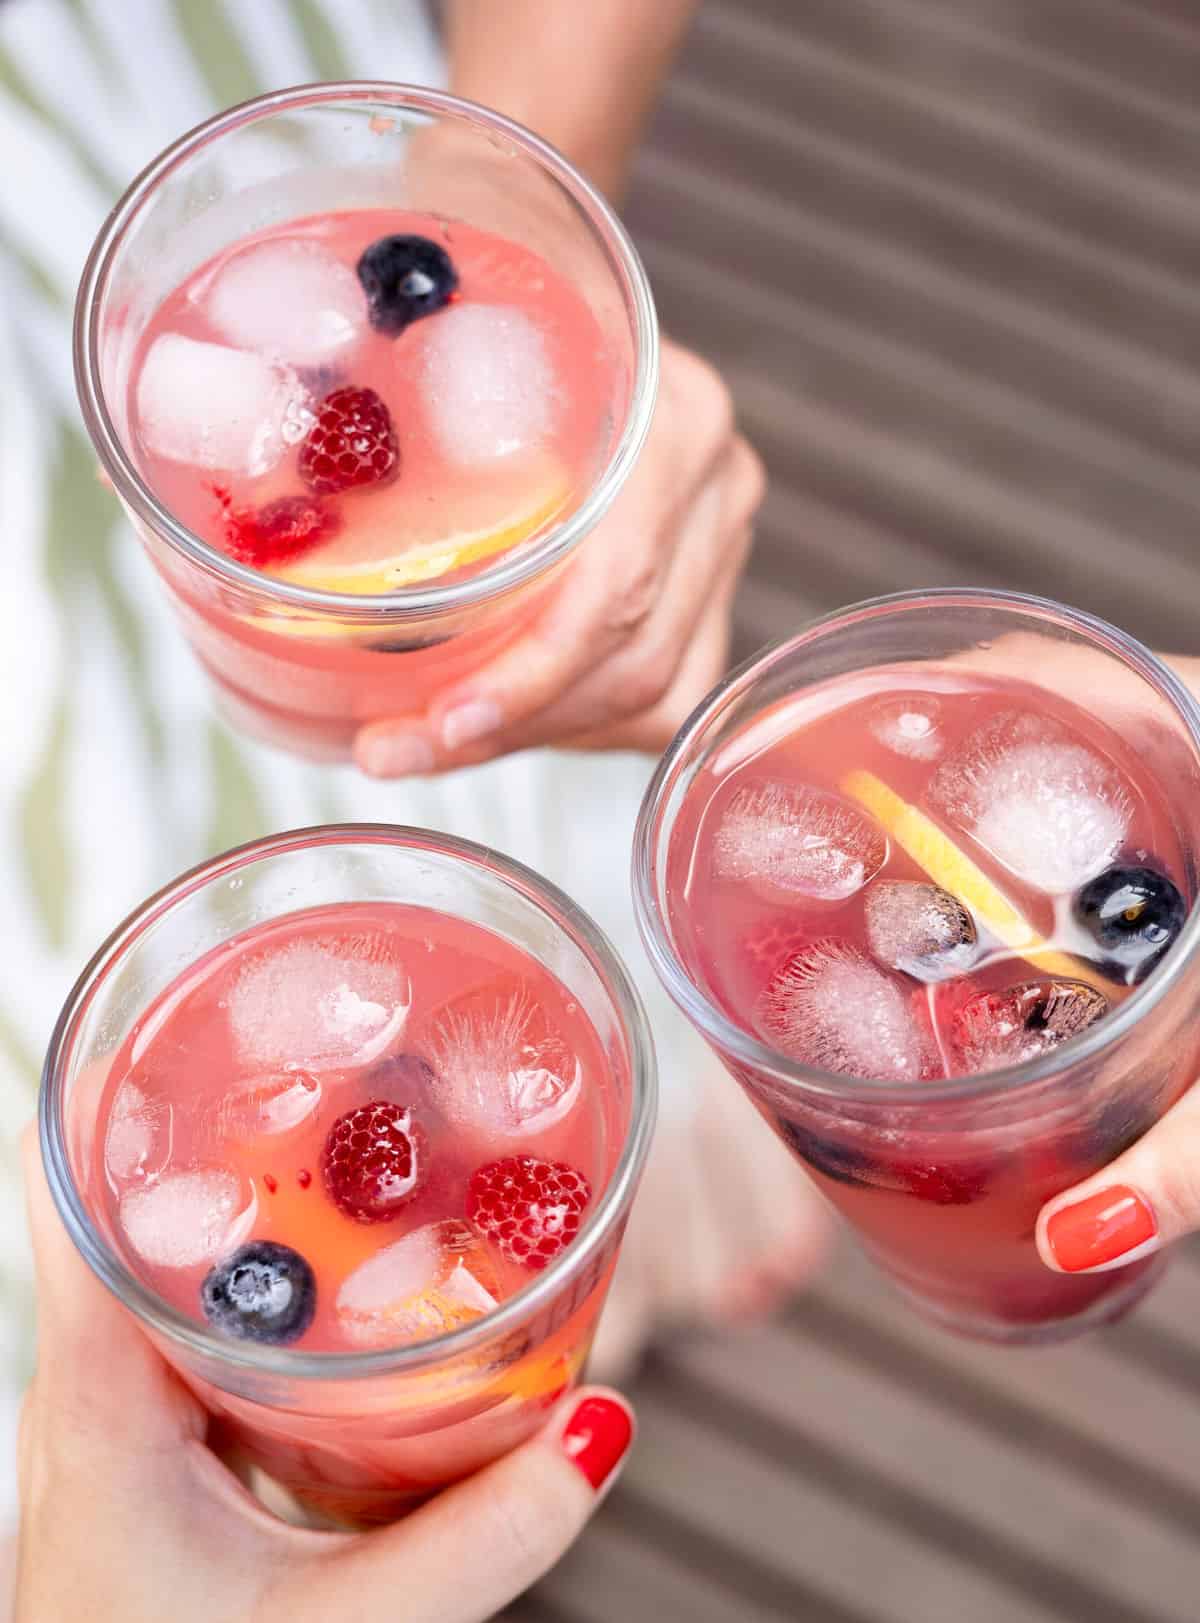 Top view of hands holding three glasses with pink lemonade, ice, and berries. 